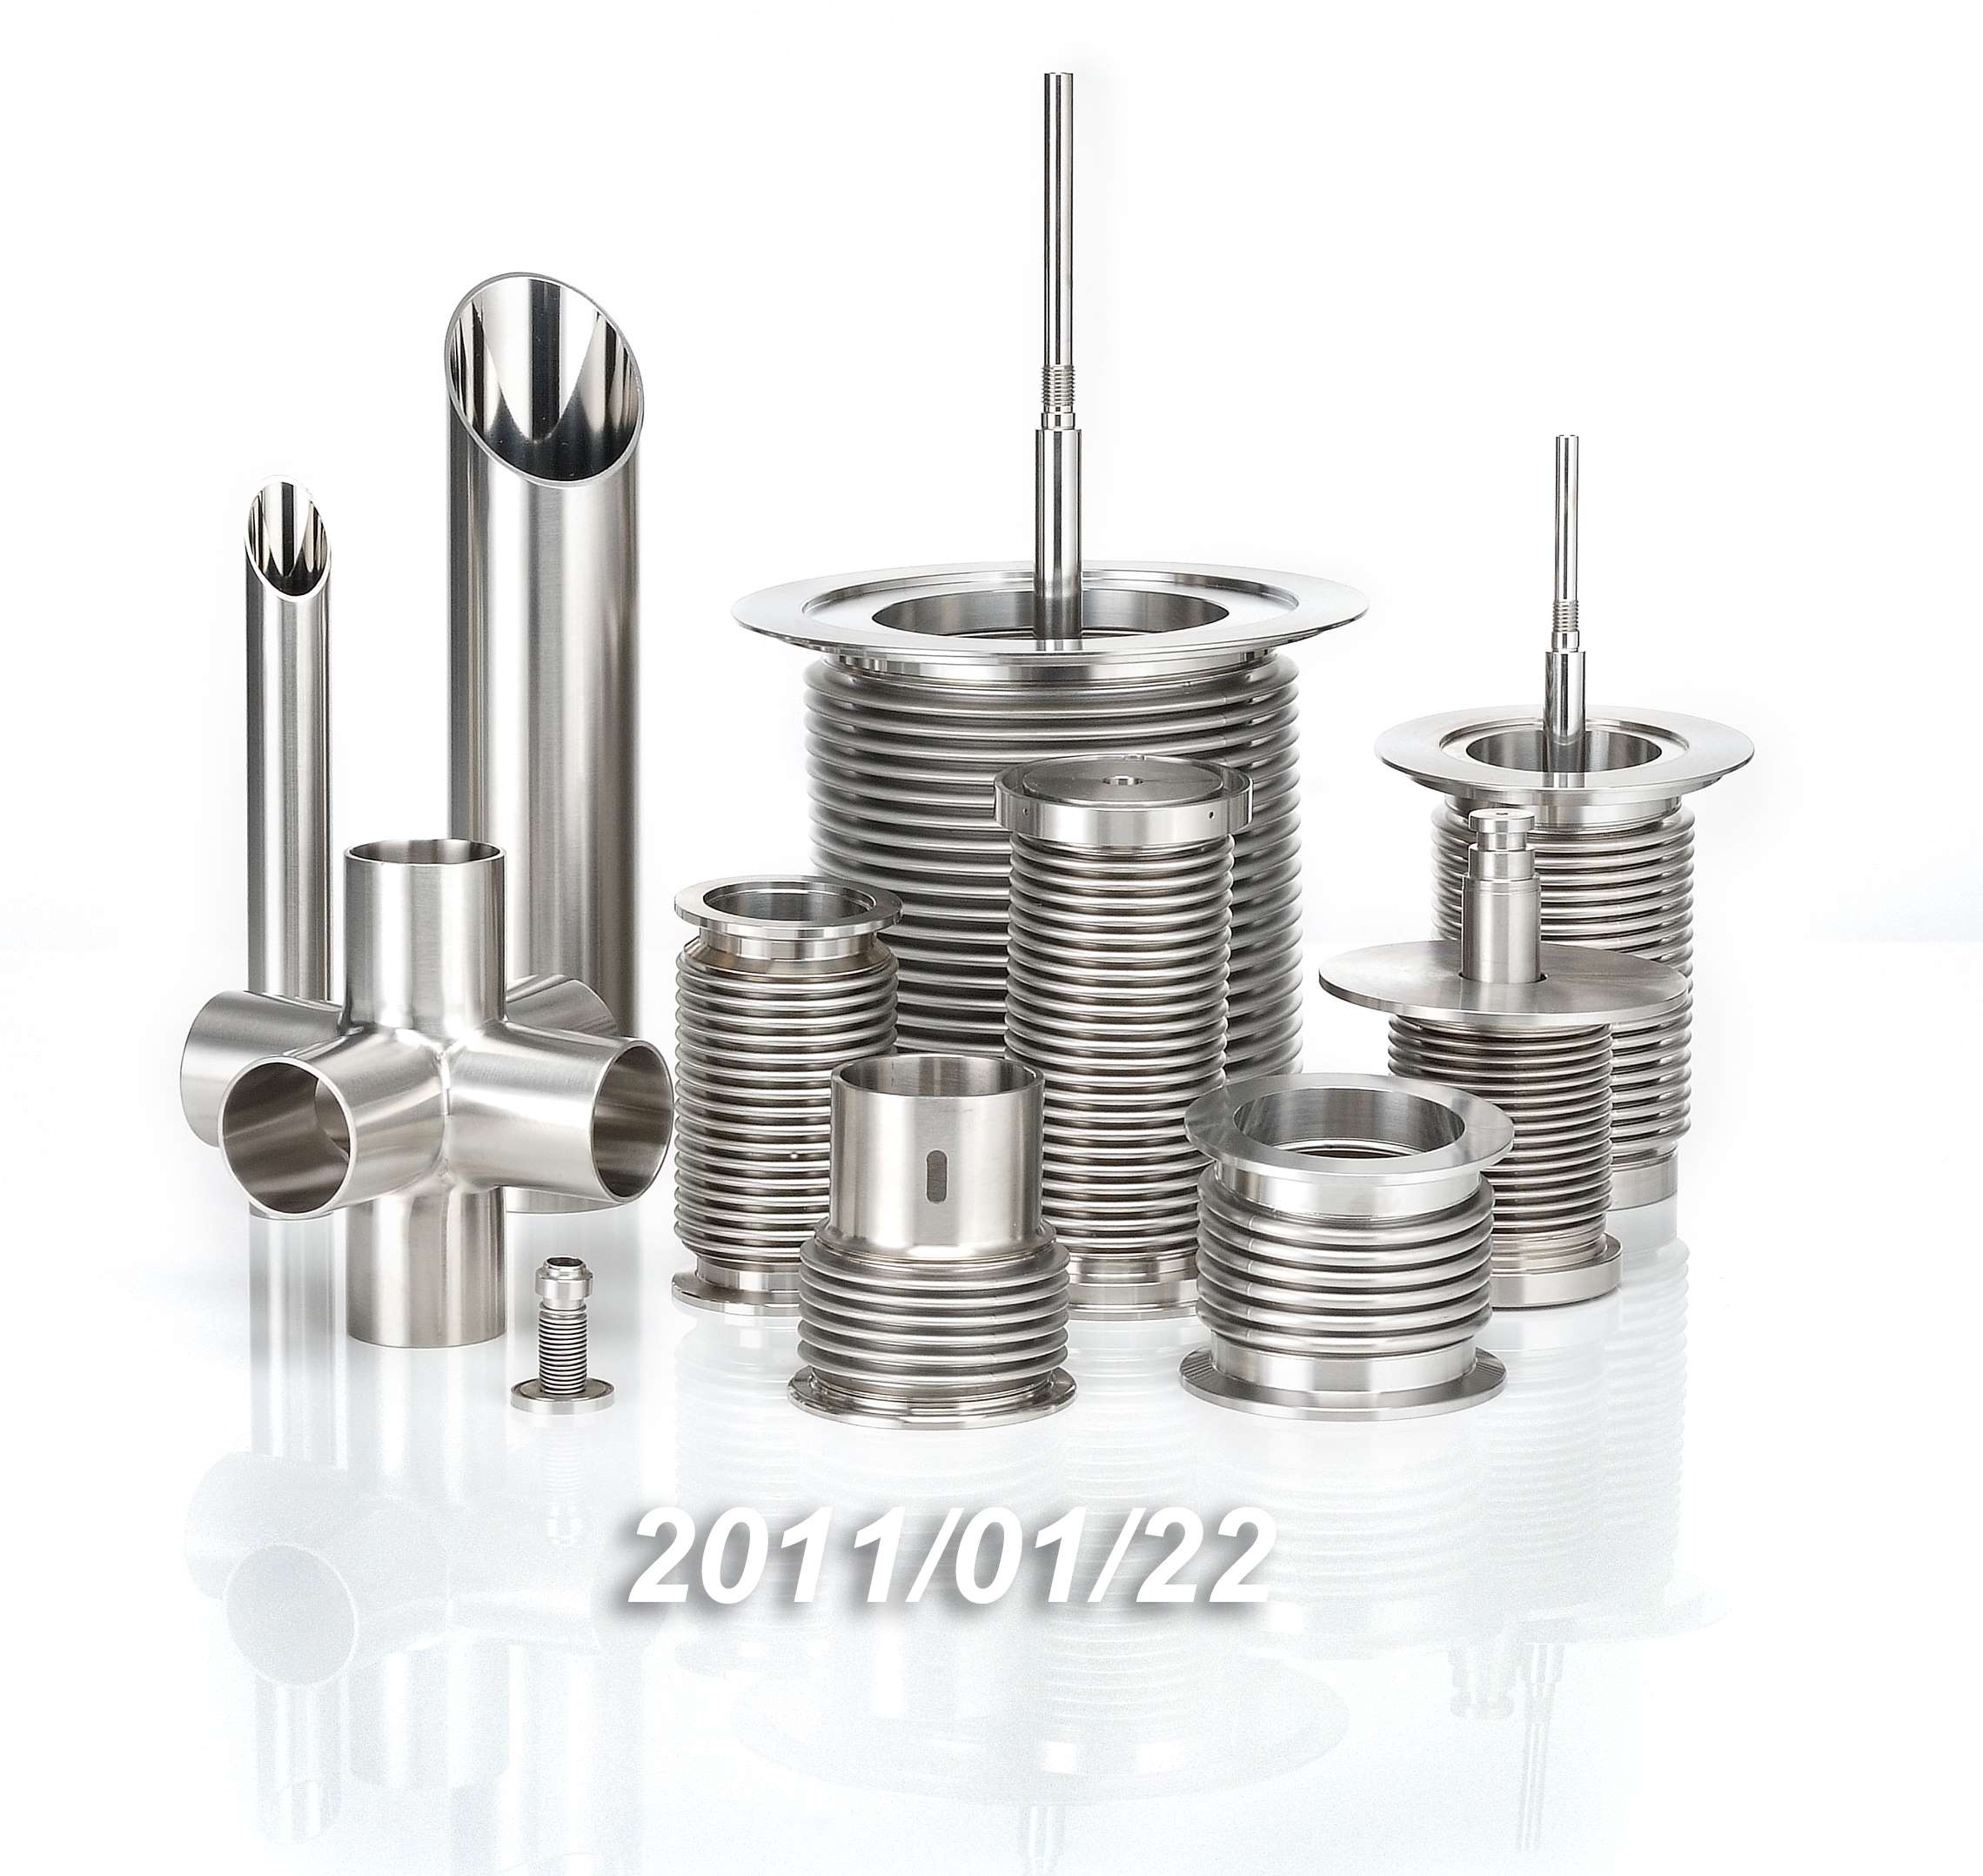 Qualified Semiconductors Manufacturer and Supplier